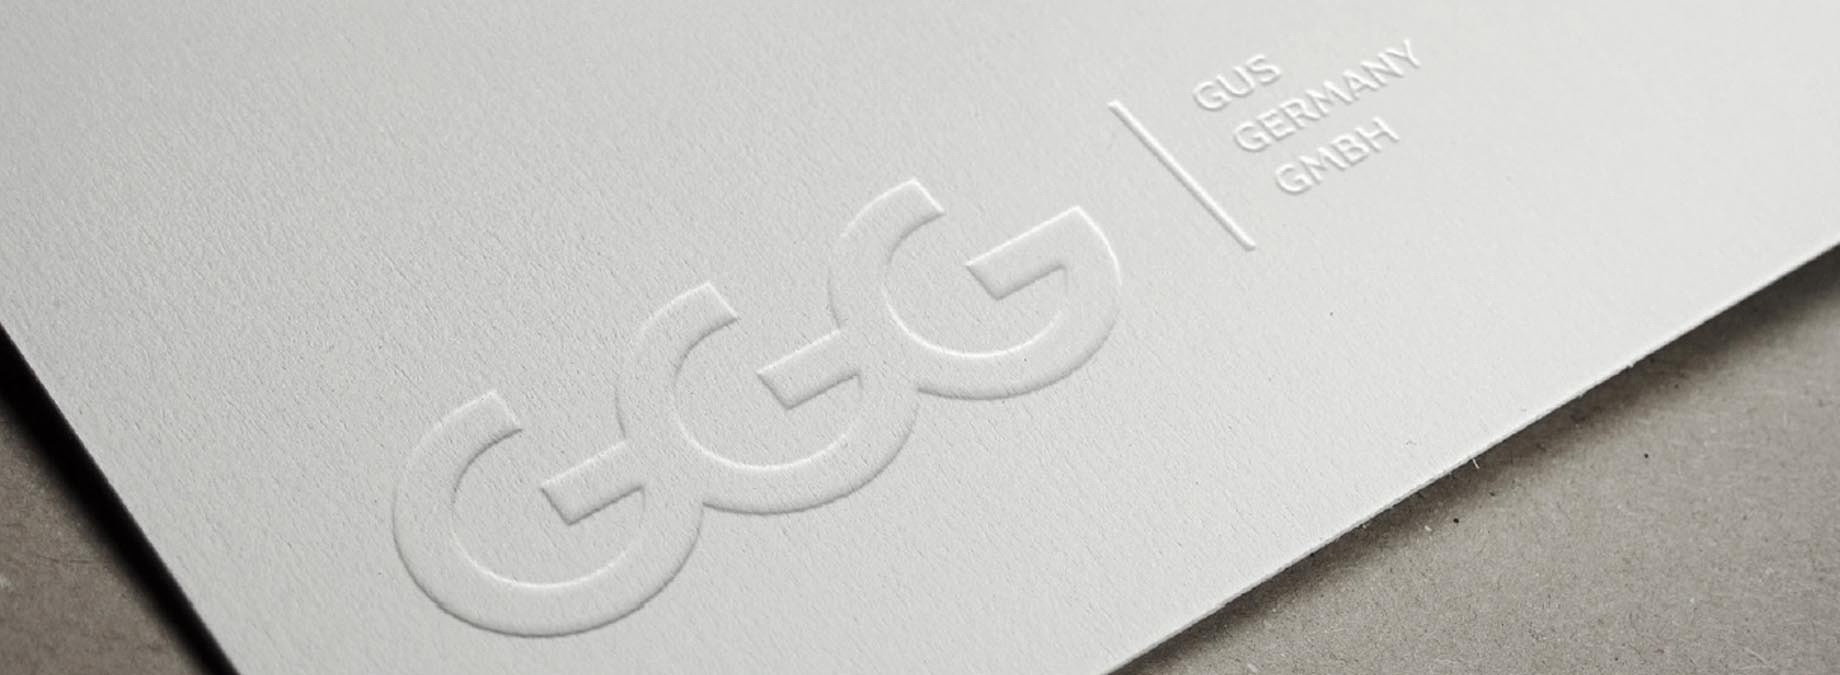 a white paper with embossed logo ggg